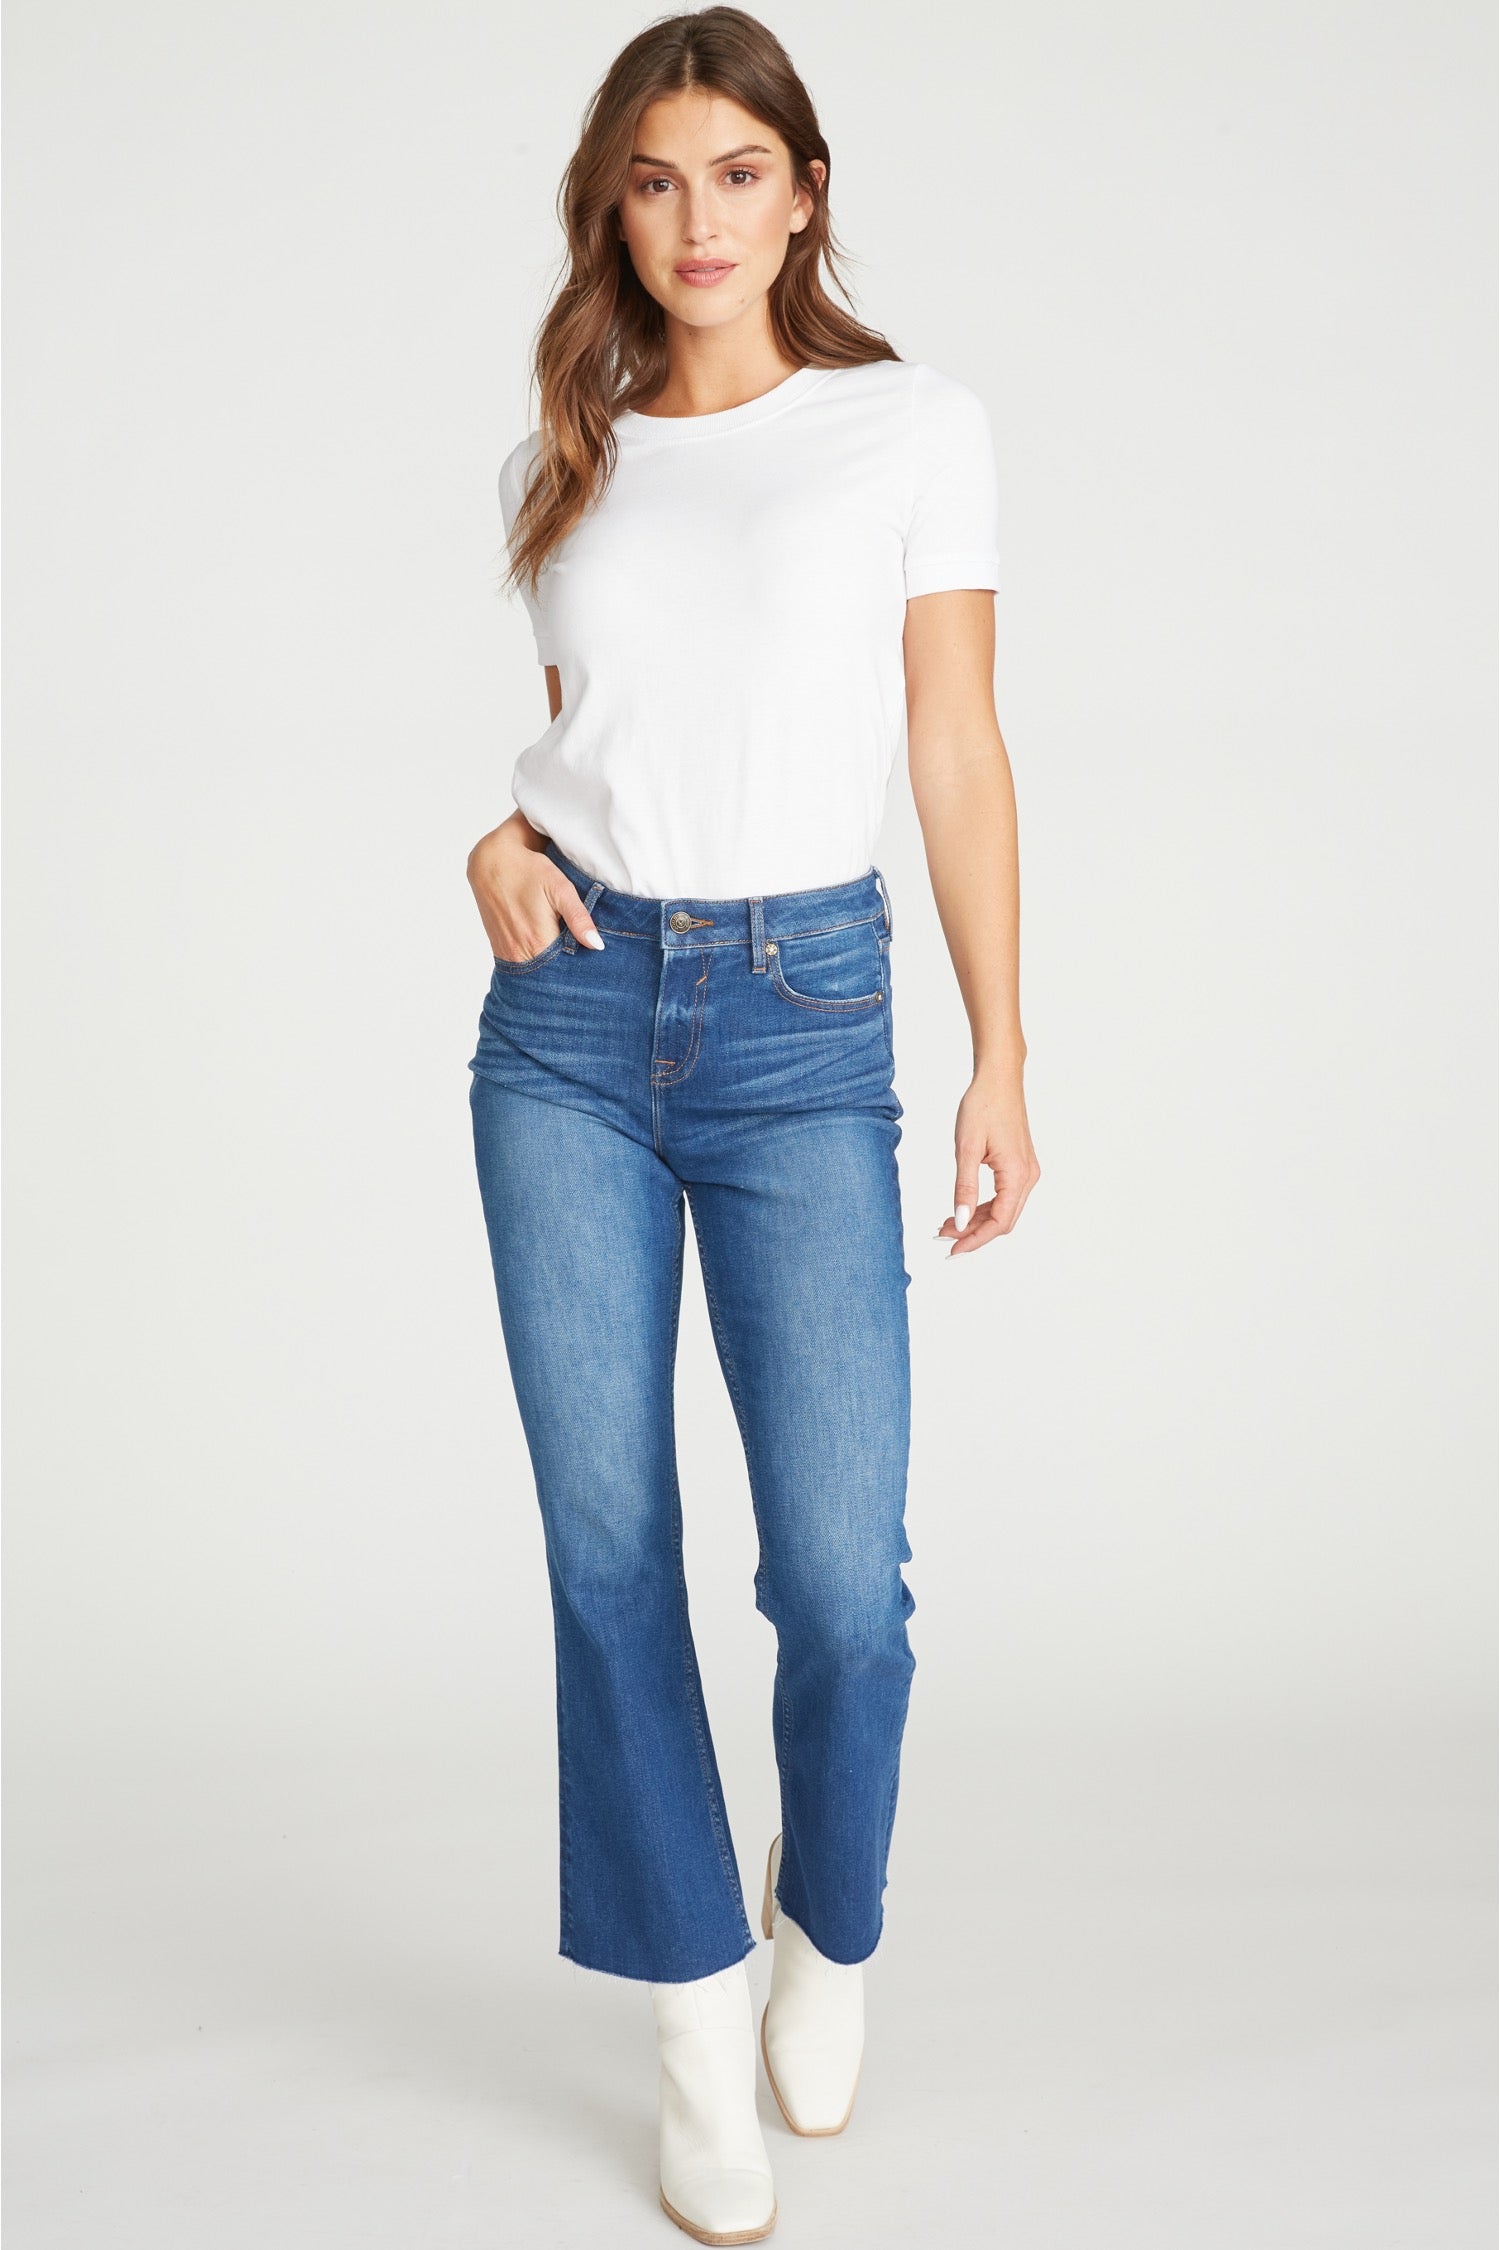 Marley Mid Rise Crop Bootcut -  Med Wash